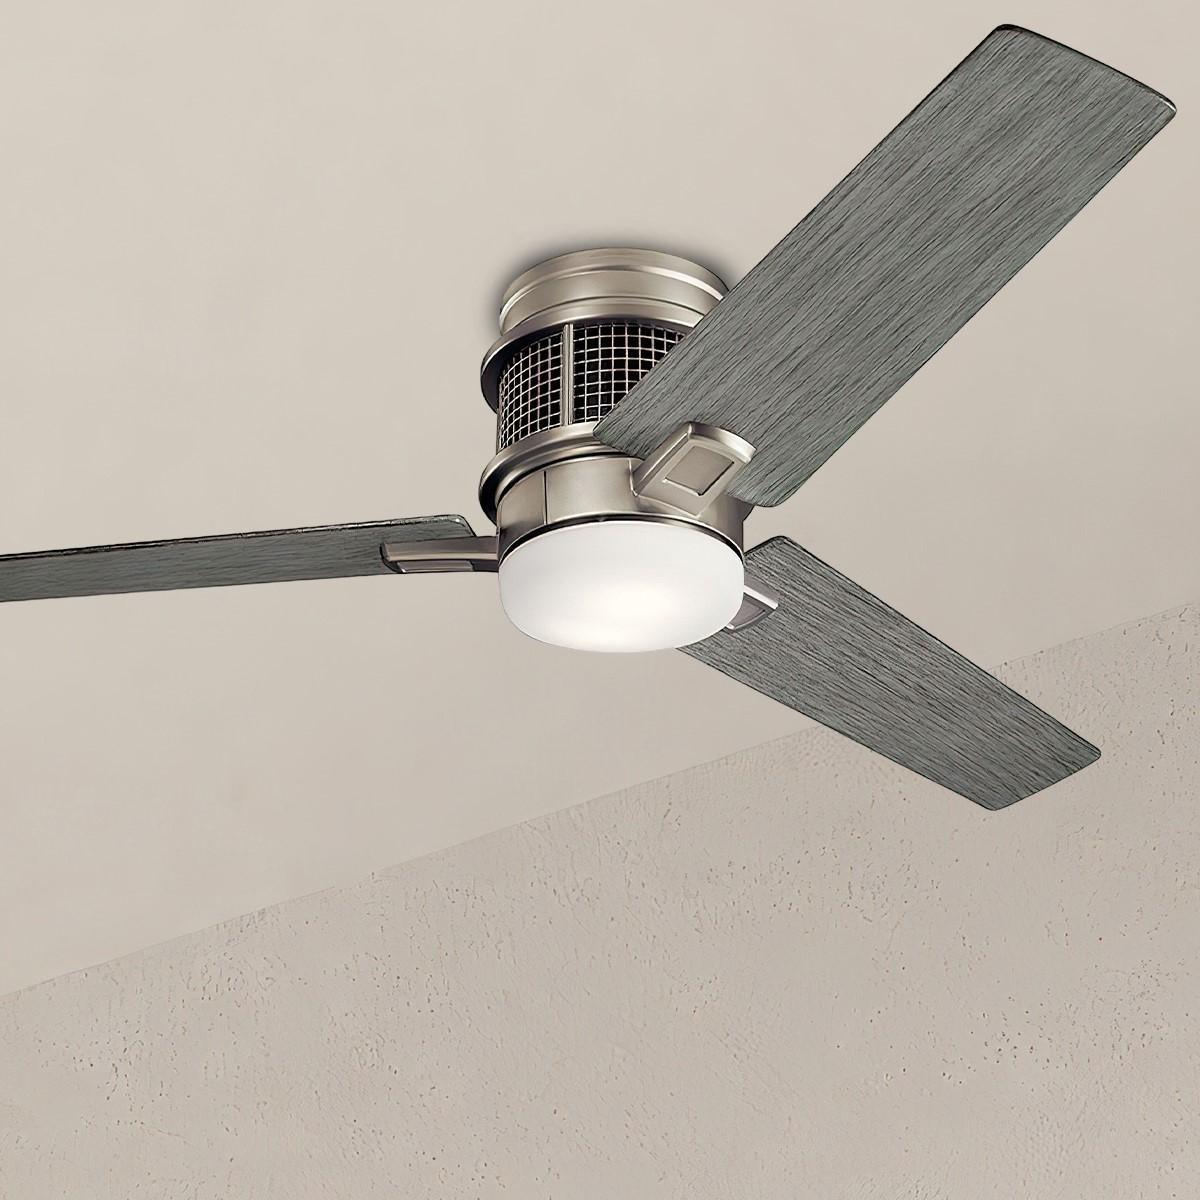 Chiara 52 Inch Rustic Caged Ceiling Fan With Light, Wall Control Included - Bees Lighting